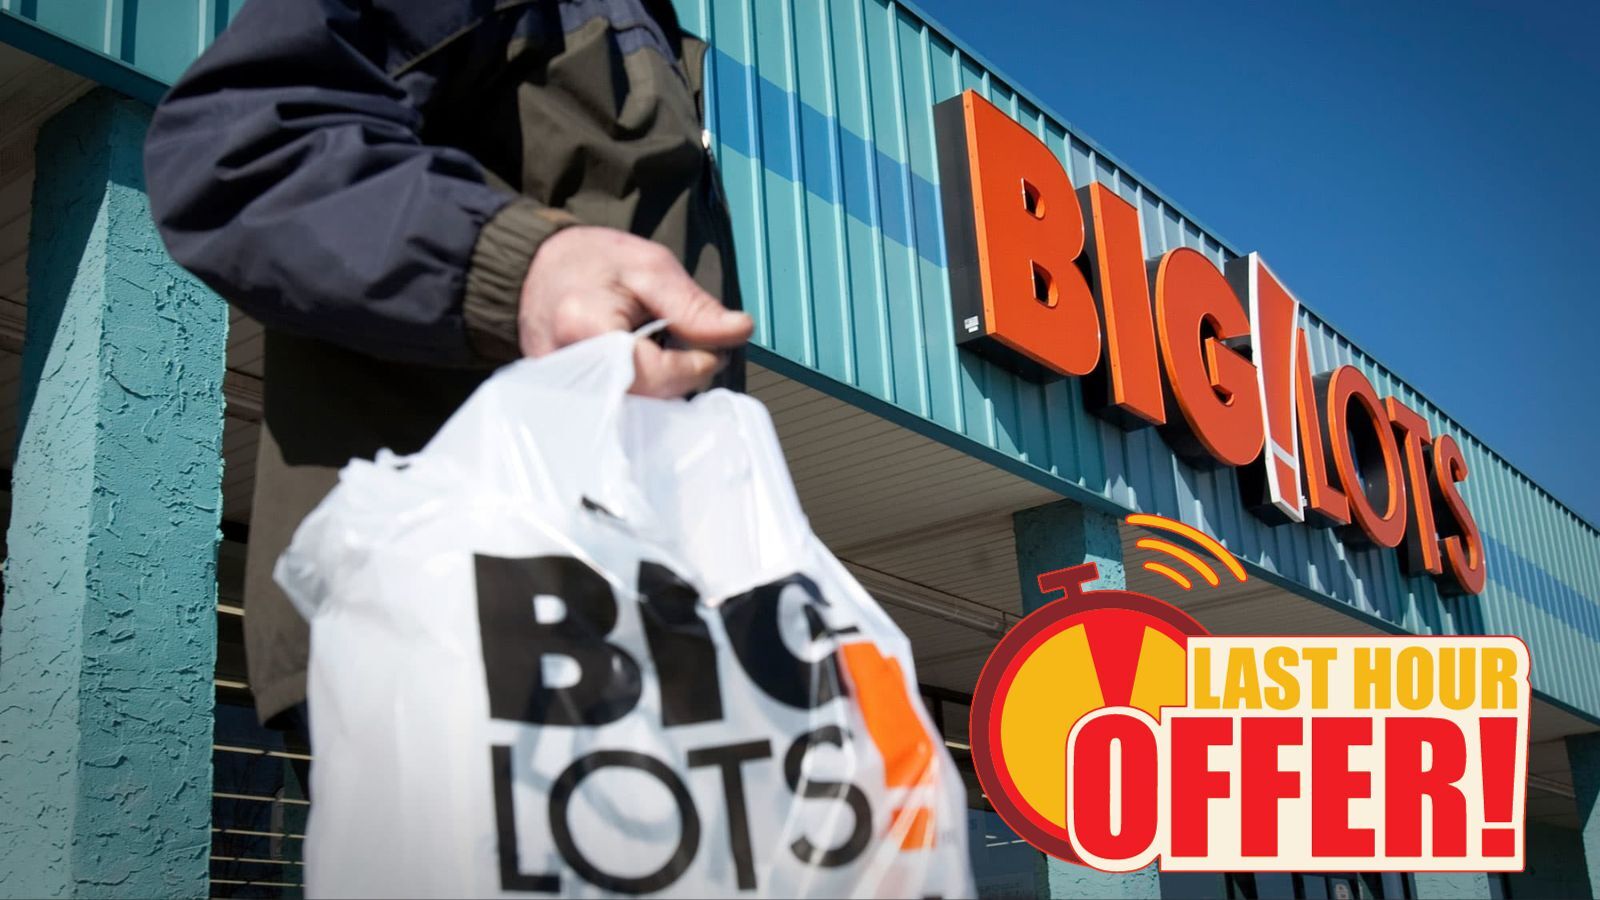 Big Lots Hours - All You Need to Know!